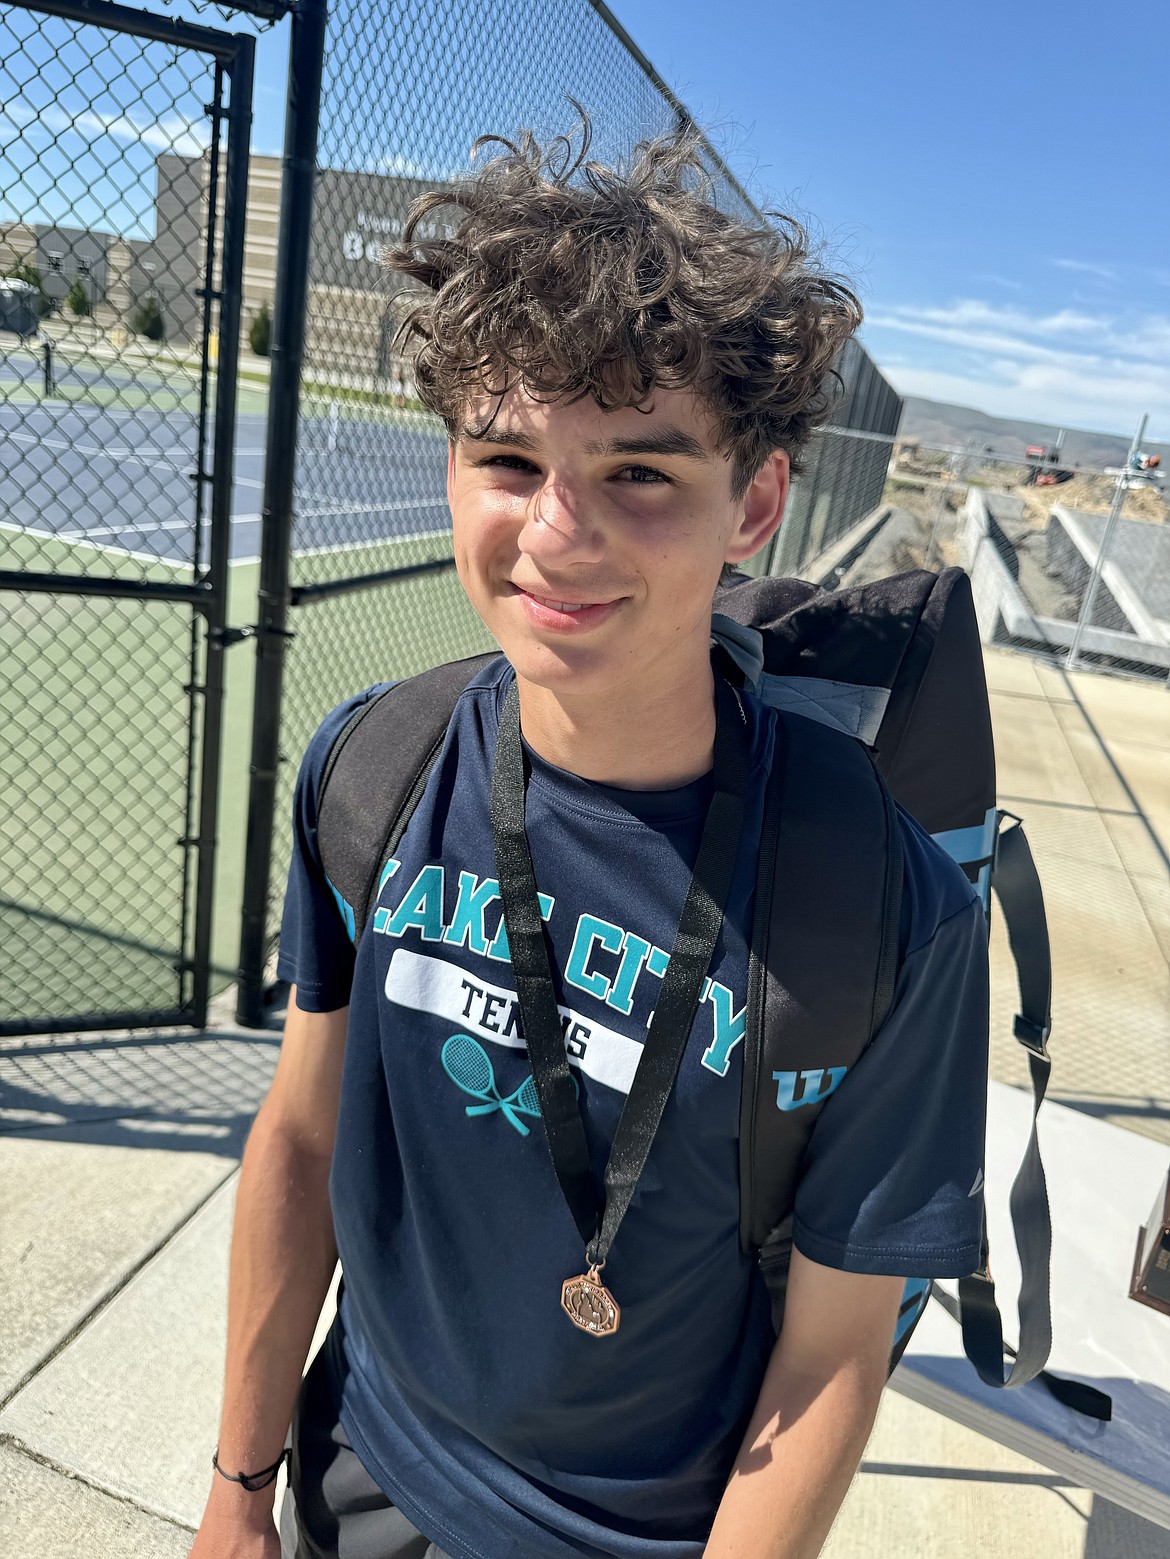 Courtesy photo
Lincoln Stowell of Lake City finished third in boys singles at the 5A Region 1 tennis tournament Saturday at Lewiston High.